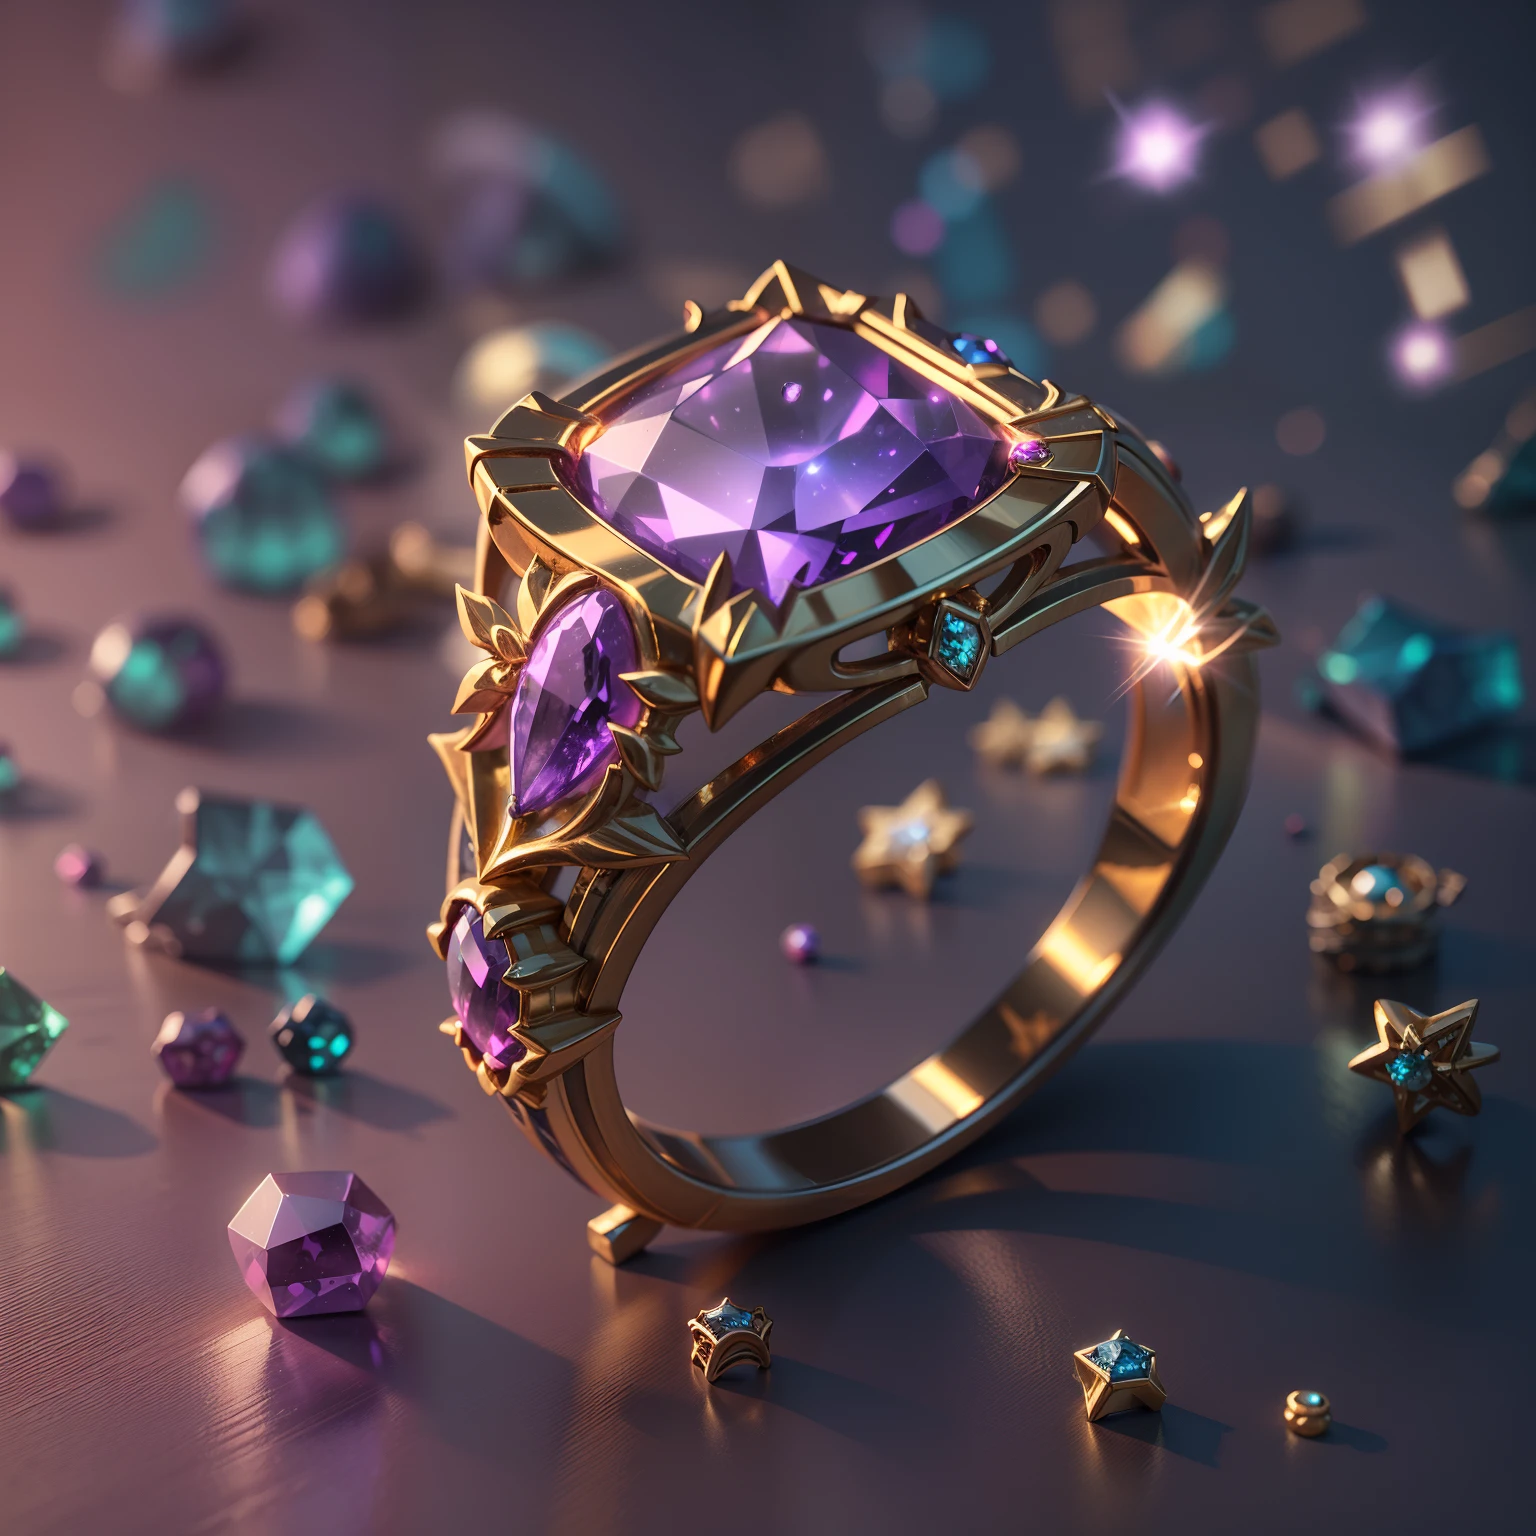 hyper HD, Super detail, Best quality, High details, 1080p, 16k, A high resolution，Purple diamond ring，A ring with a sparkling surface, Magical wish ring,  magic crystal ring, magic ring with a diamond, purple sparkles, gold and purple, ring lit,, Sparkling gold ring, glowing purple, The background is a mysterious starry sky, cosmic purple space!, Ring photography, Gemstones and yellow gold rings，(The best illustrations)，(The best shadow)，Isometric 3D.Octane rendering，Hyperrealistic